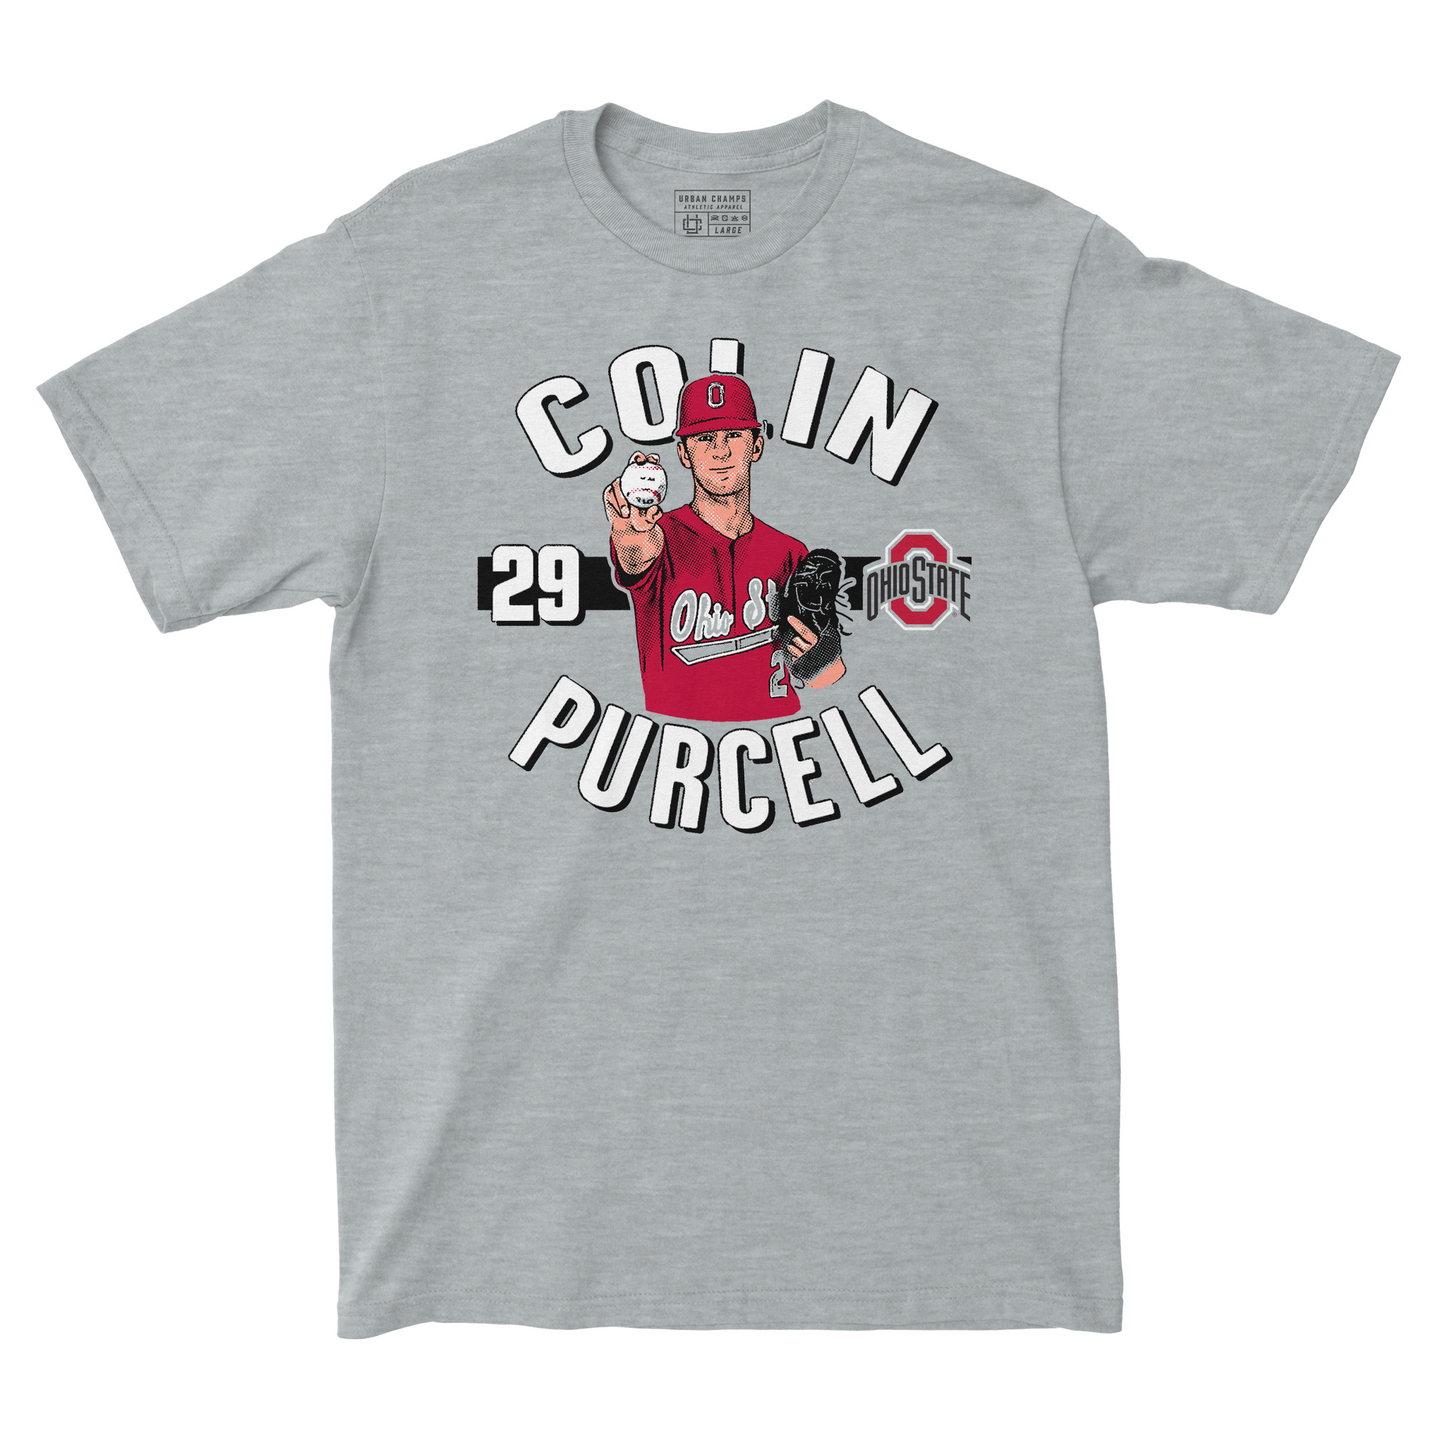 EXCLUSIVE RELEASE: Colin Purcell RHP Tee